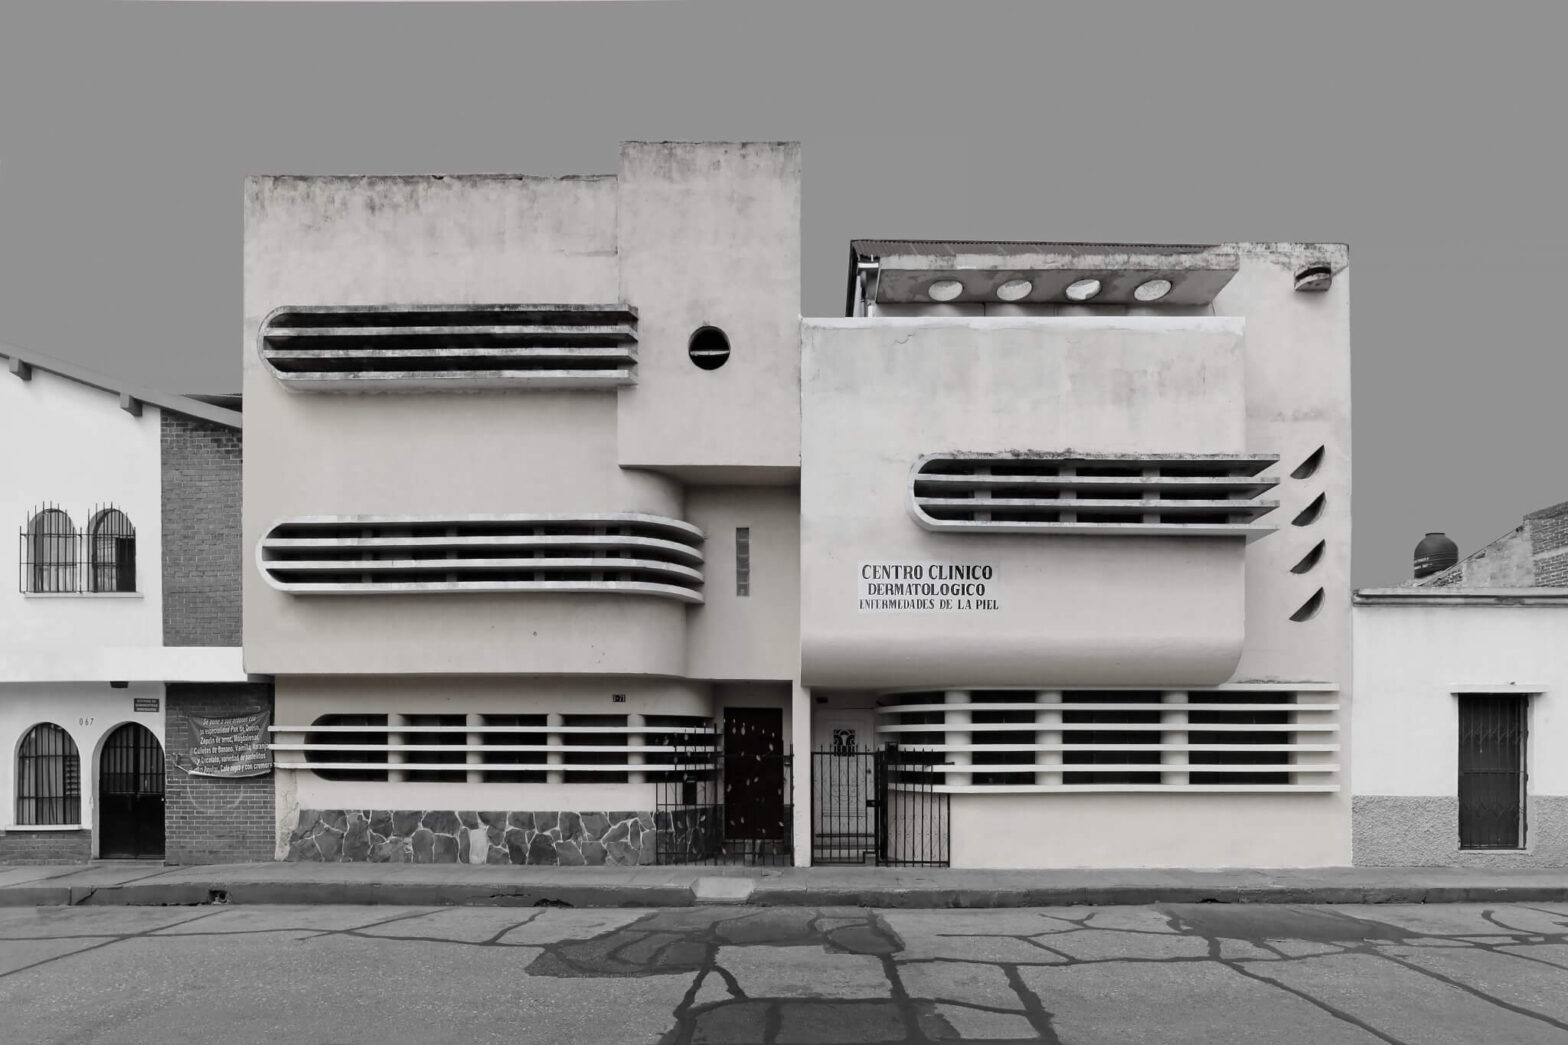 Tropical Modernism – How did this architecture reach the equator?